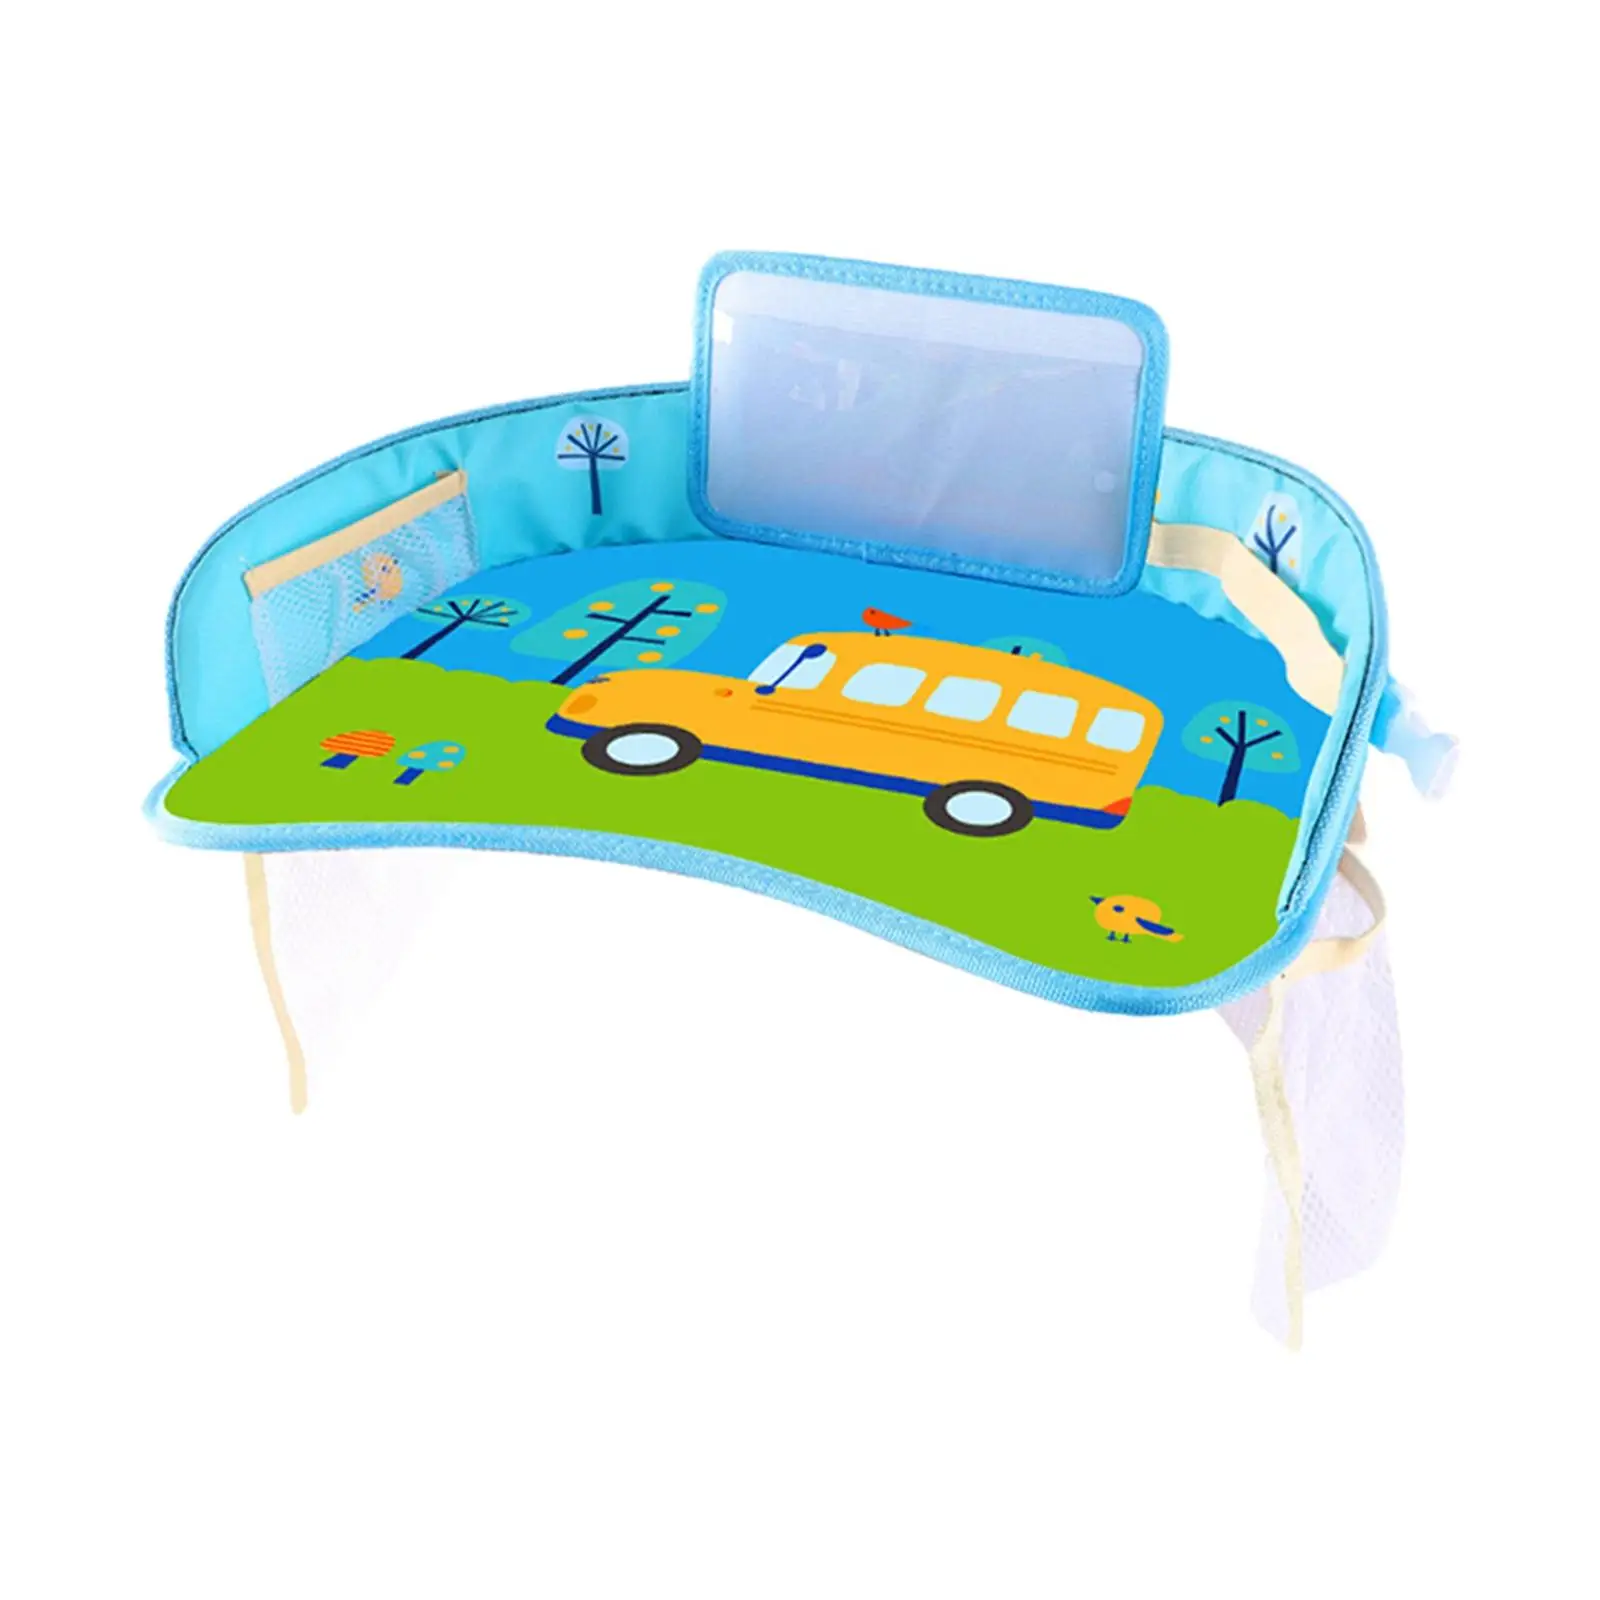 Toddler  Organizer Eating Drawing Snack Activity Tray Waterproof Multifunctional Wipe to Clean Toddler  Lap Tray for Kids